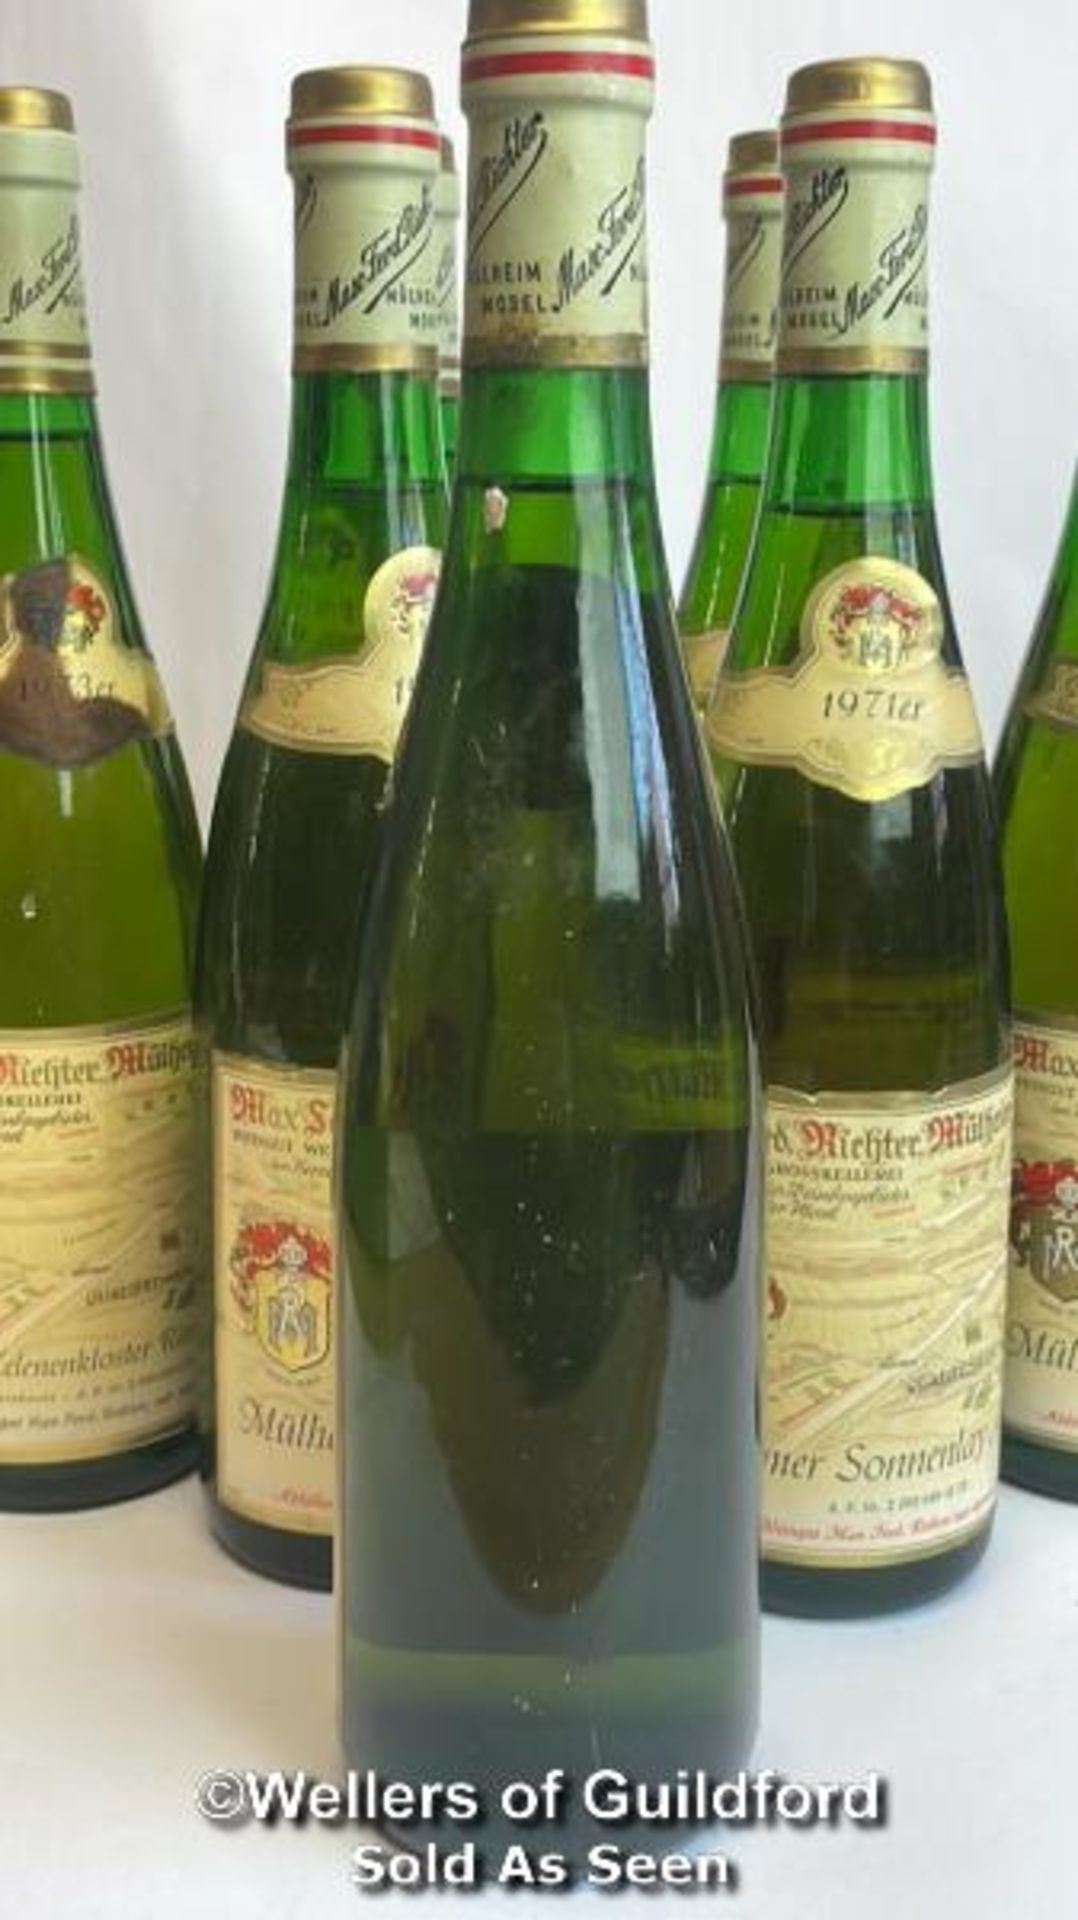 Nine bottles of Max Ferd. Richter Mulheimer Helenenkloster Riesling Auslese, Six 1971 and Three 1973 - Image 6 of 11